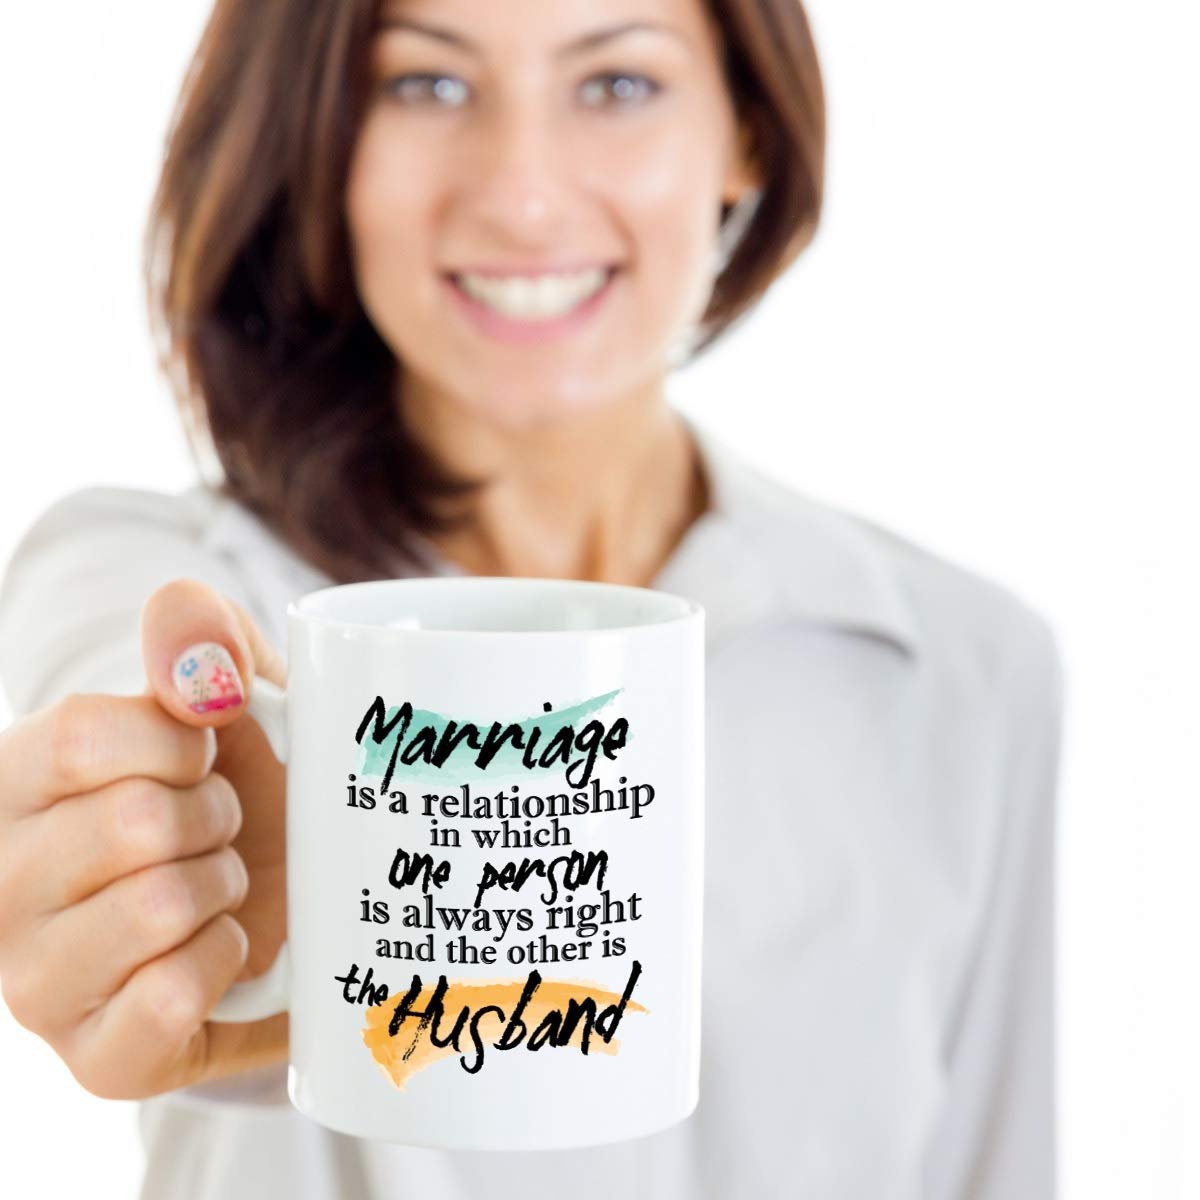 Marriage Is A Relationship In Which One Person Is Always Right Quotes Coffee & Tea Gift Mug Stuff And Funny Wedding Day, Anniversary Or Milestone Gifts For A Couple, Wife, Husband, Bride & Groom - image 3 of 4